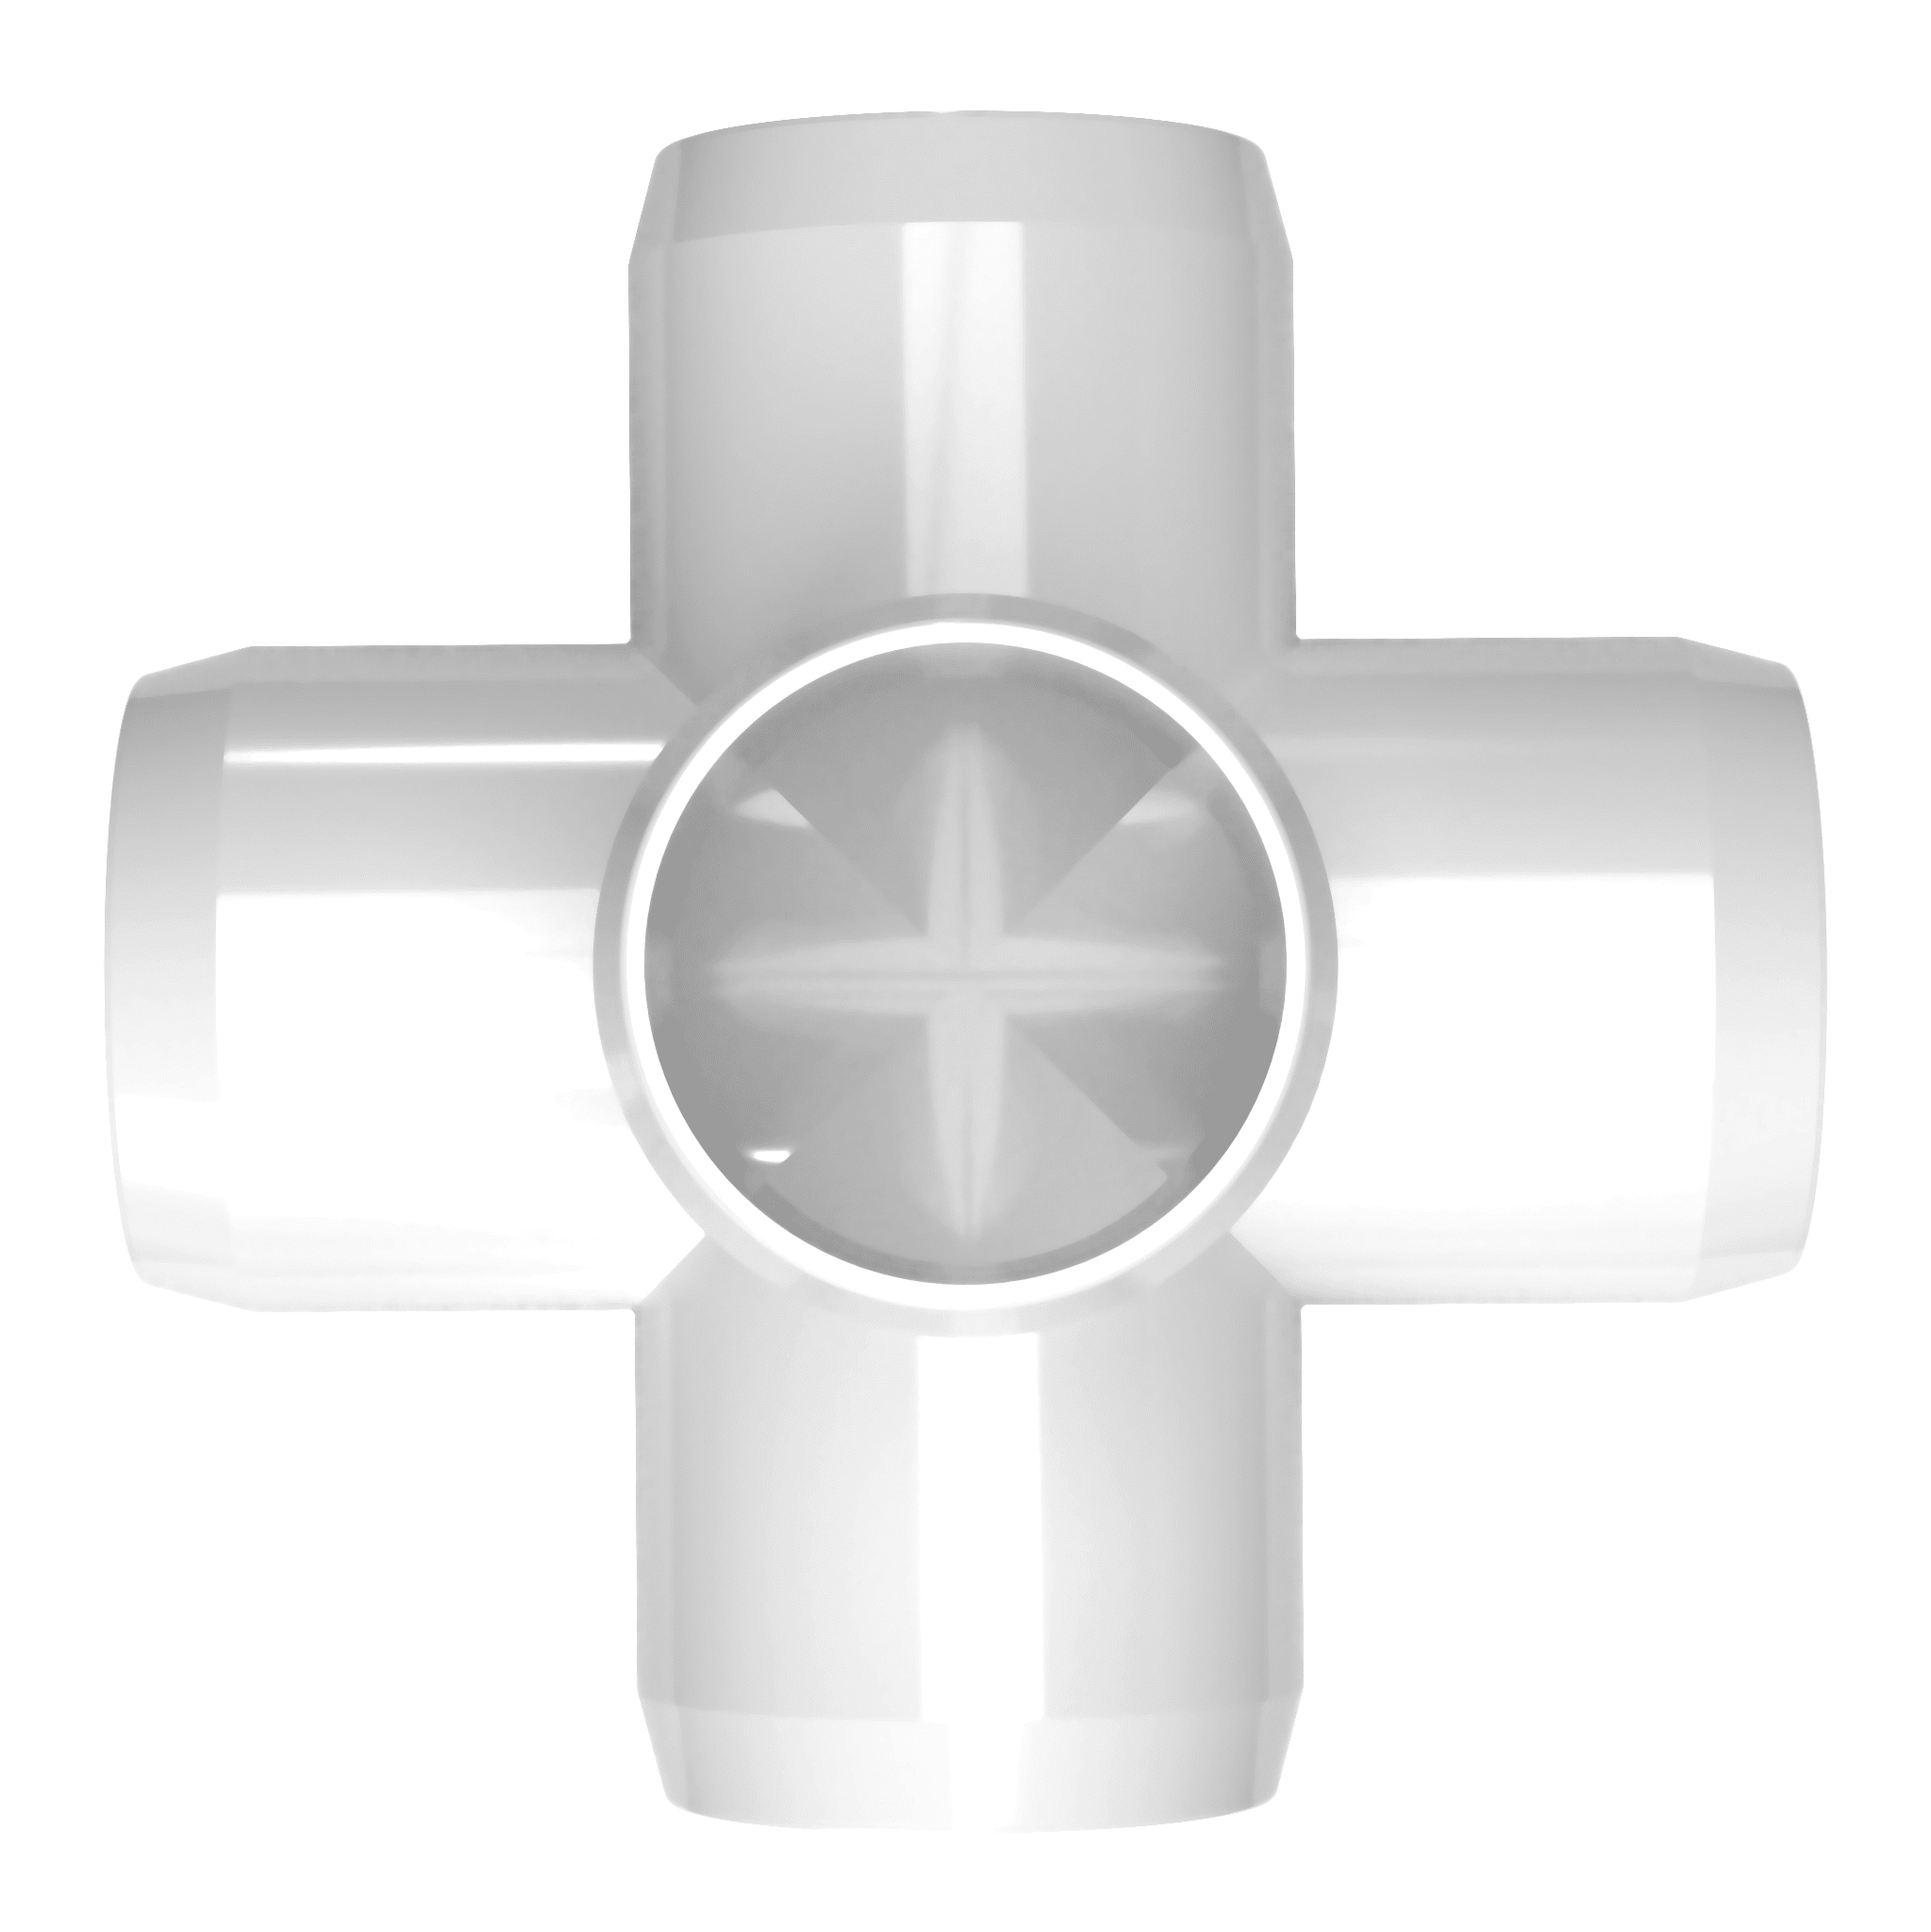 FORMUFIT PVC Fitting, 5-Way Cross Side Outlet, Furniture Grade, 1 Size,  White, 4-Pack (F0015WC-WH-4) 